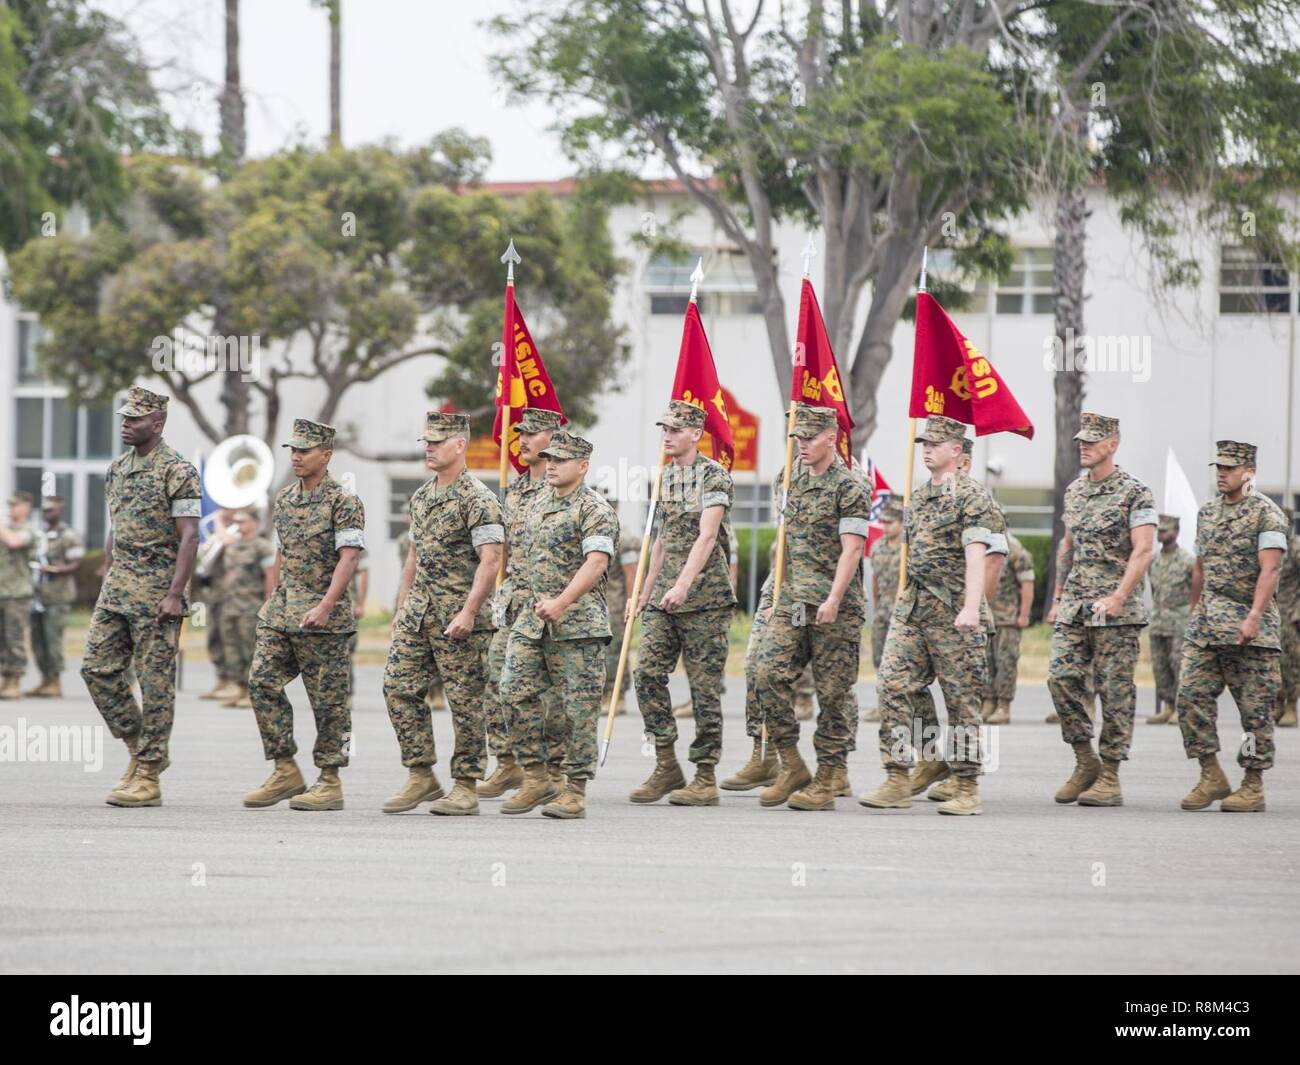 U.S. Marines with 3rd Assault Amphibian Battalion, 1st Marine Division march during a relief and appointment, and retirement ceremony for Sgt. Maj. Christopher Slattery on Camp Pendleton, Calif., May 5, 2017. Sgt. Maj. Slattery relinquished his post as Sgt. Maj. of 3rd Assault Amphibian Battalion, 1st Marine Division before retiring after serving honorably for 30 years. Stock Photo